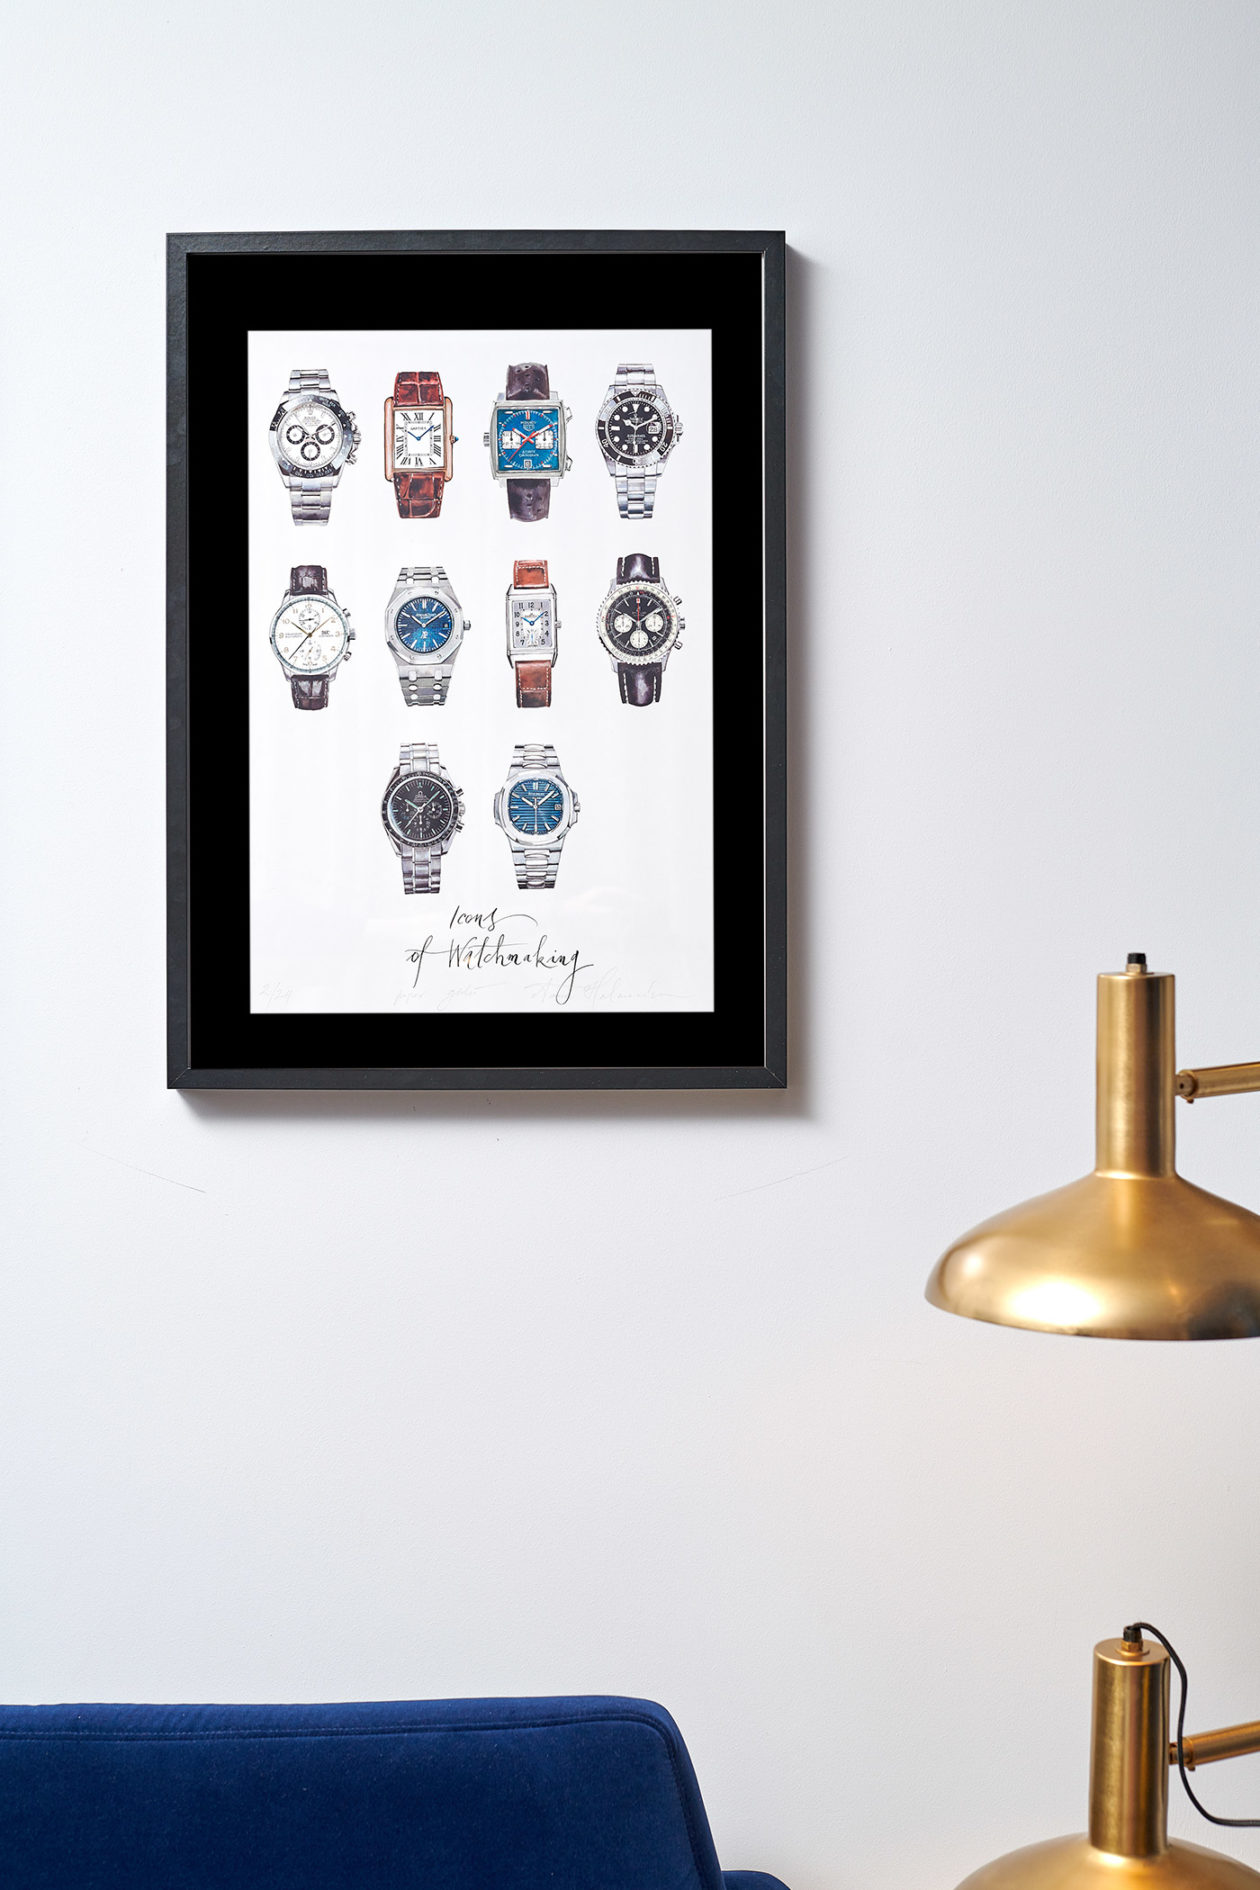 "Icons of Watchmaking" by Anna Halarewicz